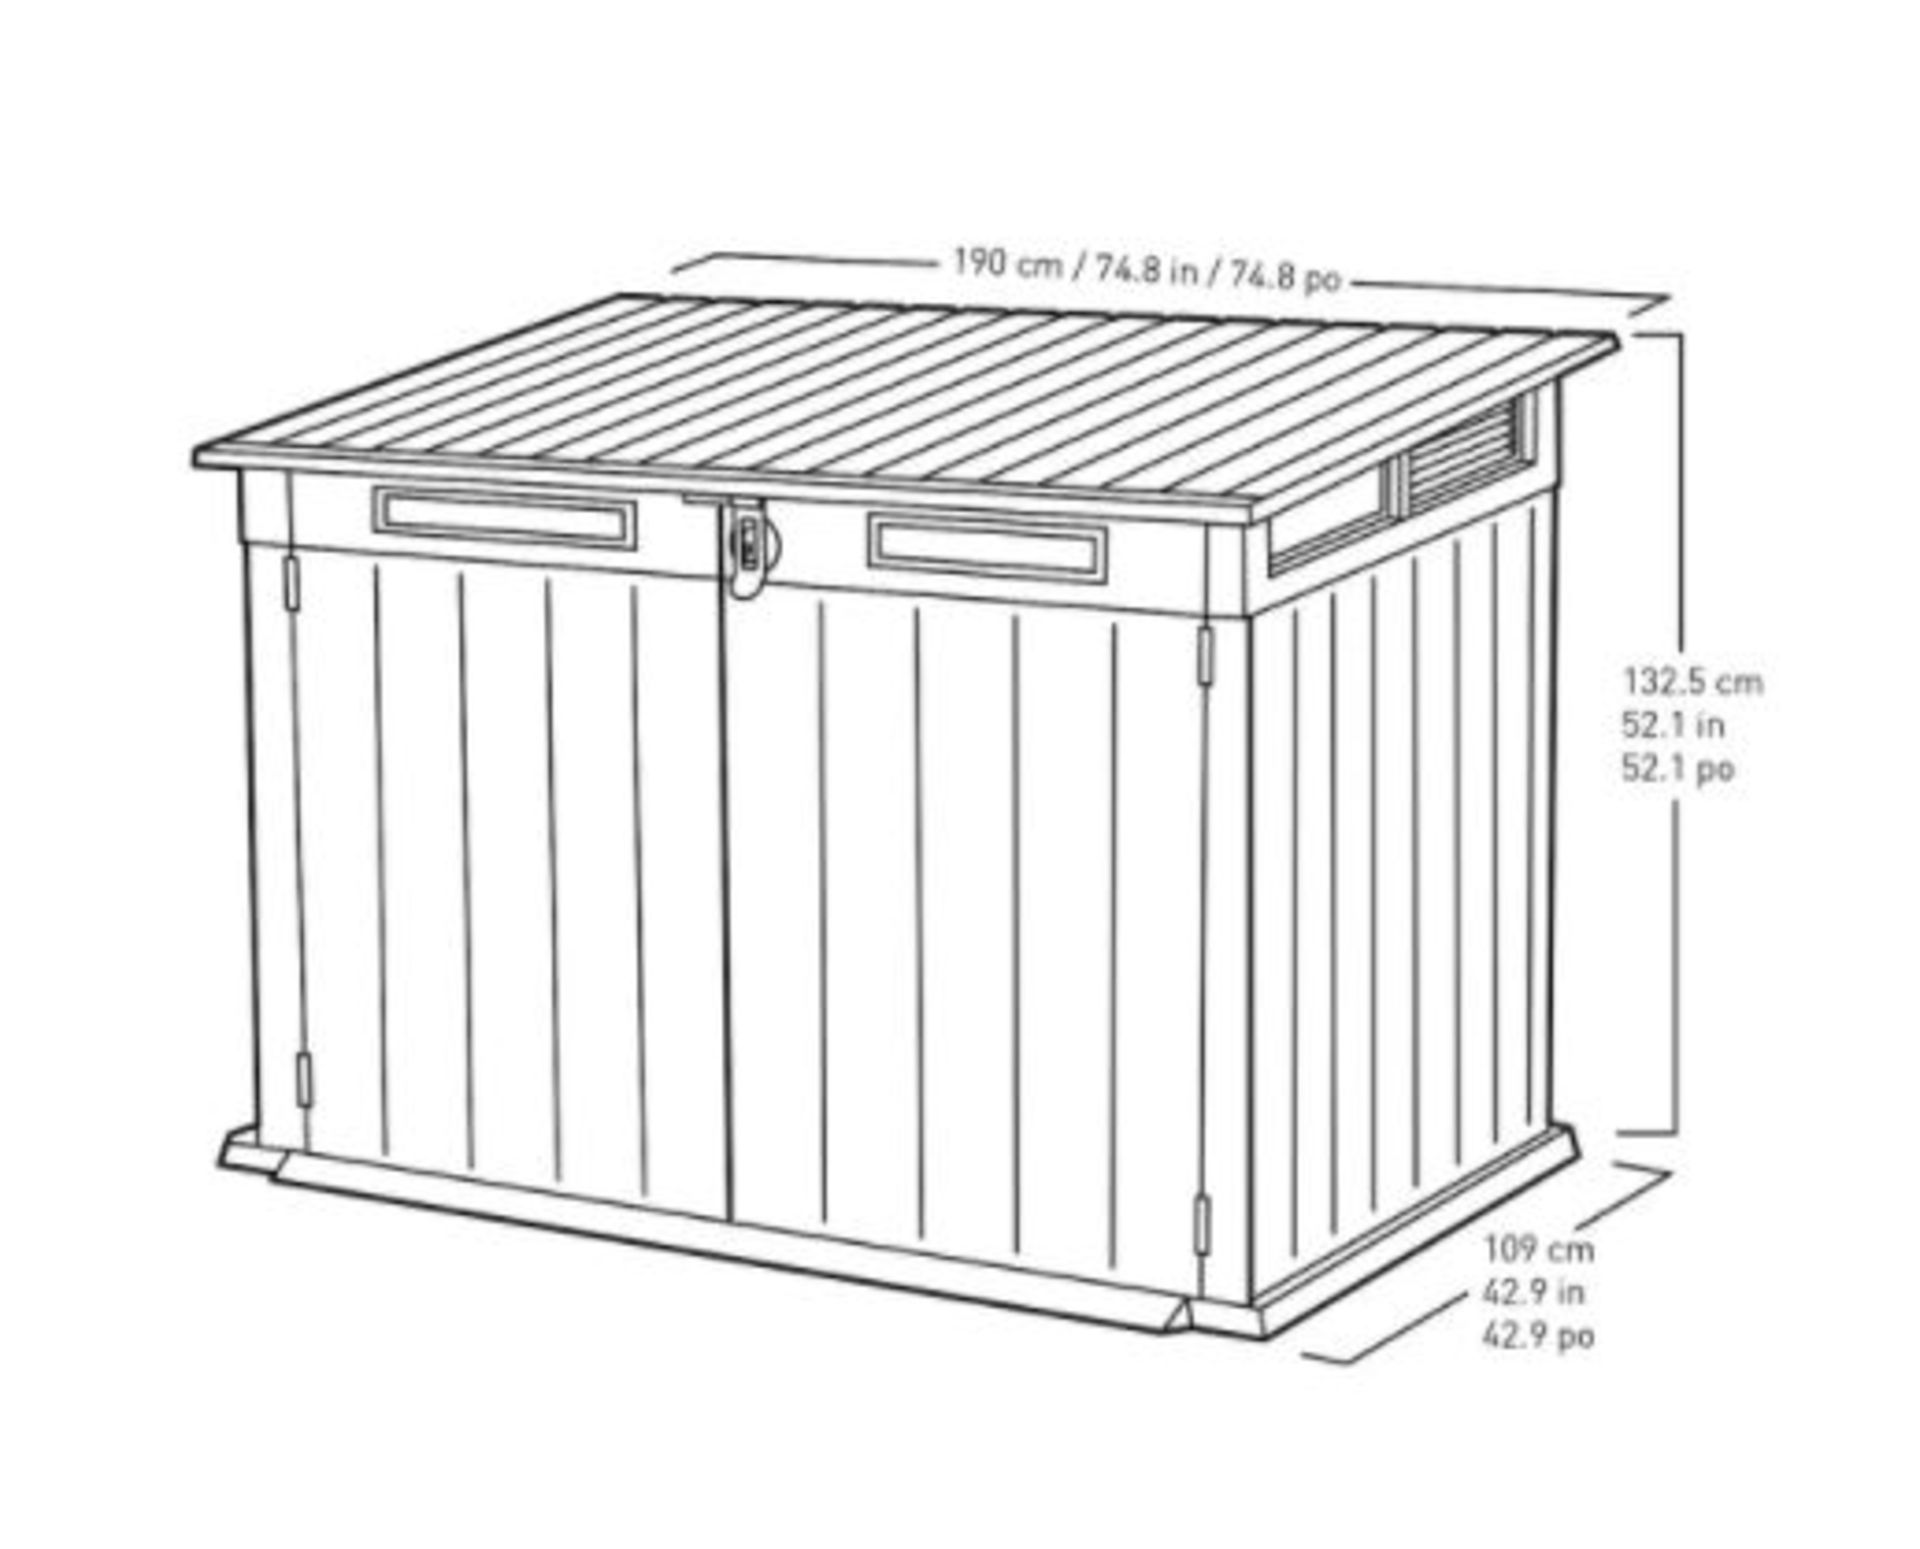 (R16) 1x Keter Premier Jumbo Outdoor Plastic Garden Storage Shed Grey RRP £385. Piston Assisted Li - Image 6 of 13